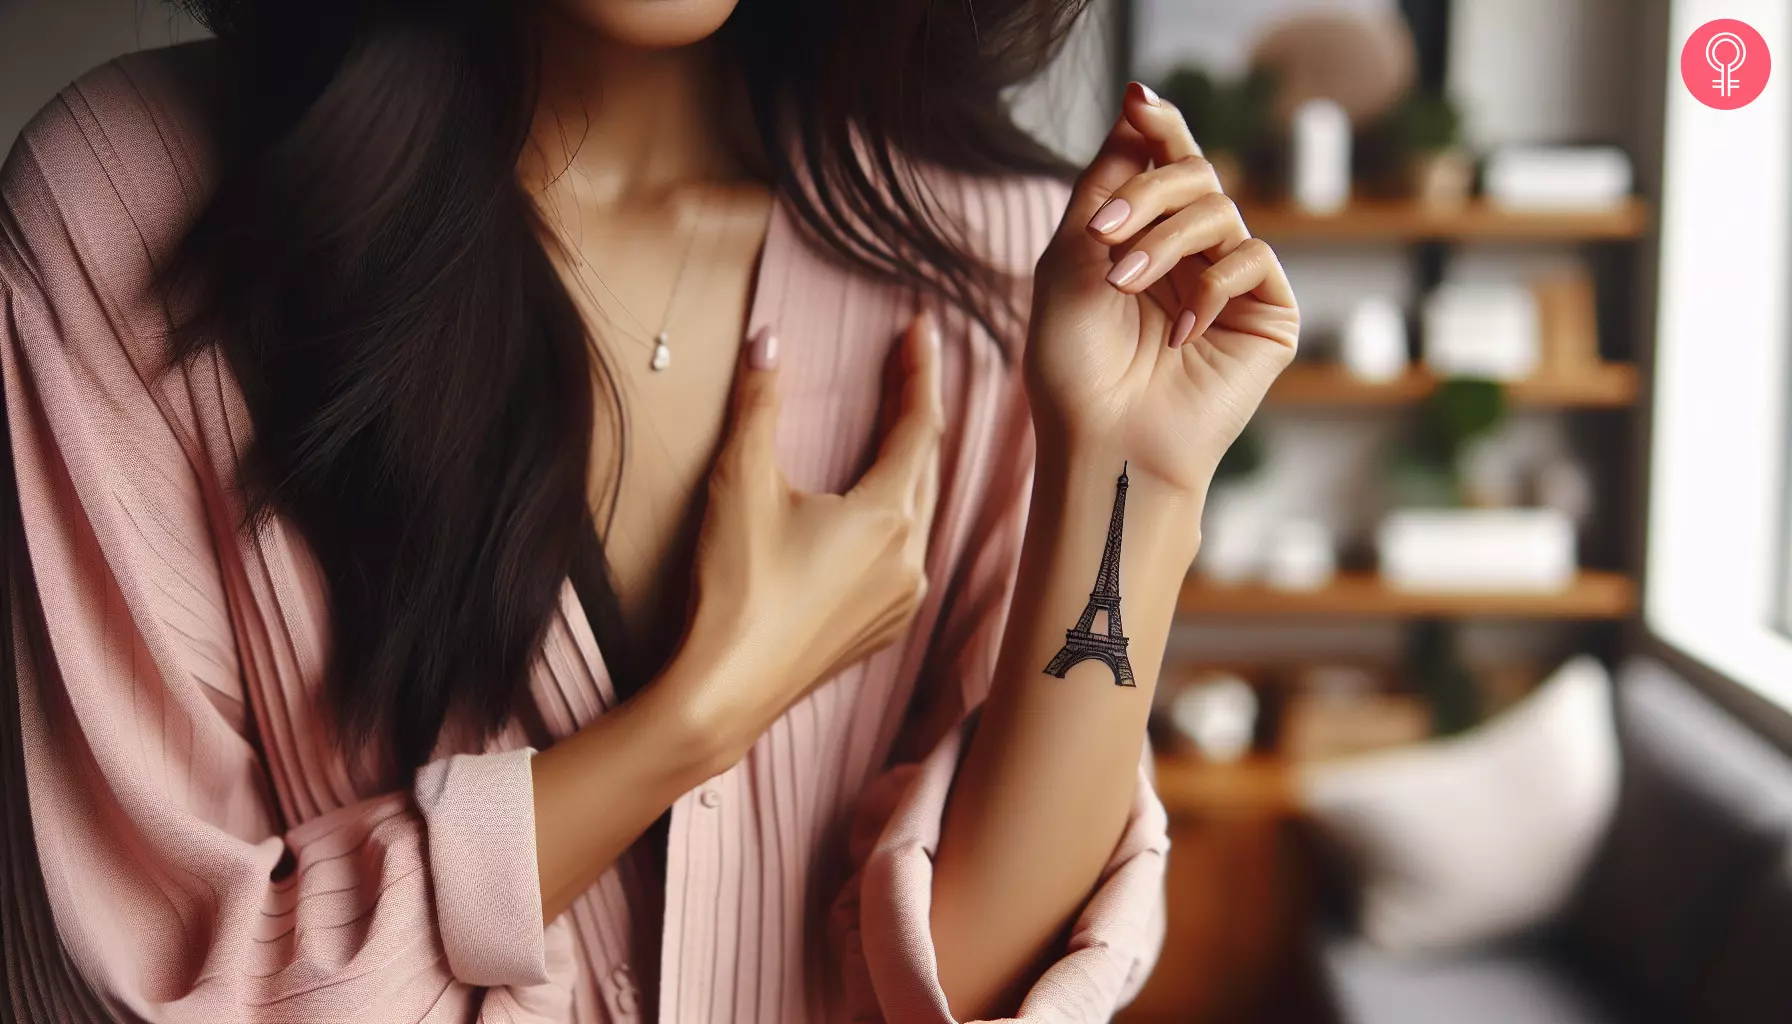 A woman with an Eiffel Tower tattoo on her wrist